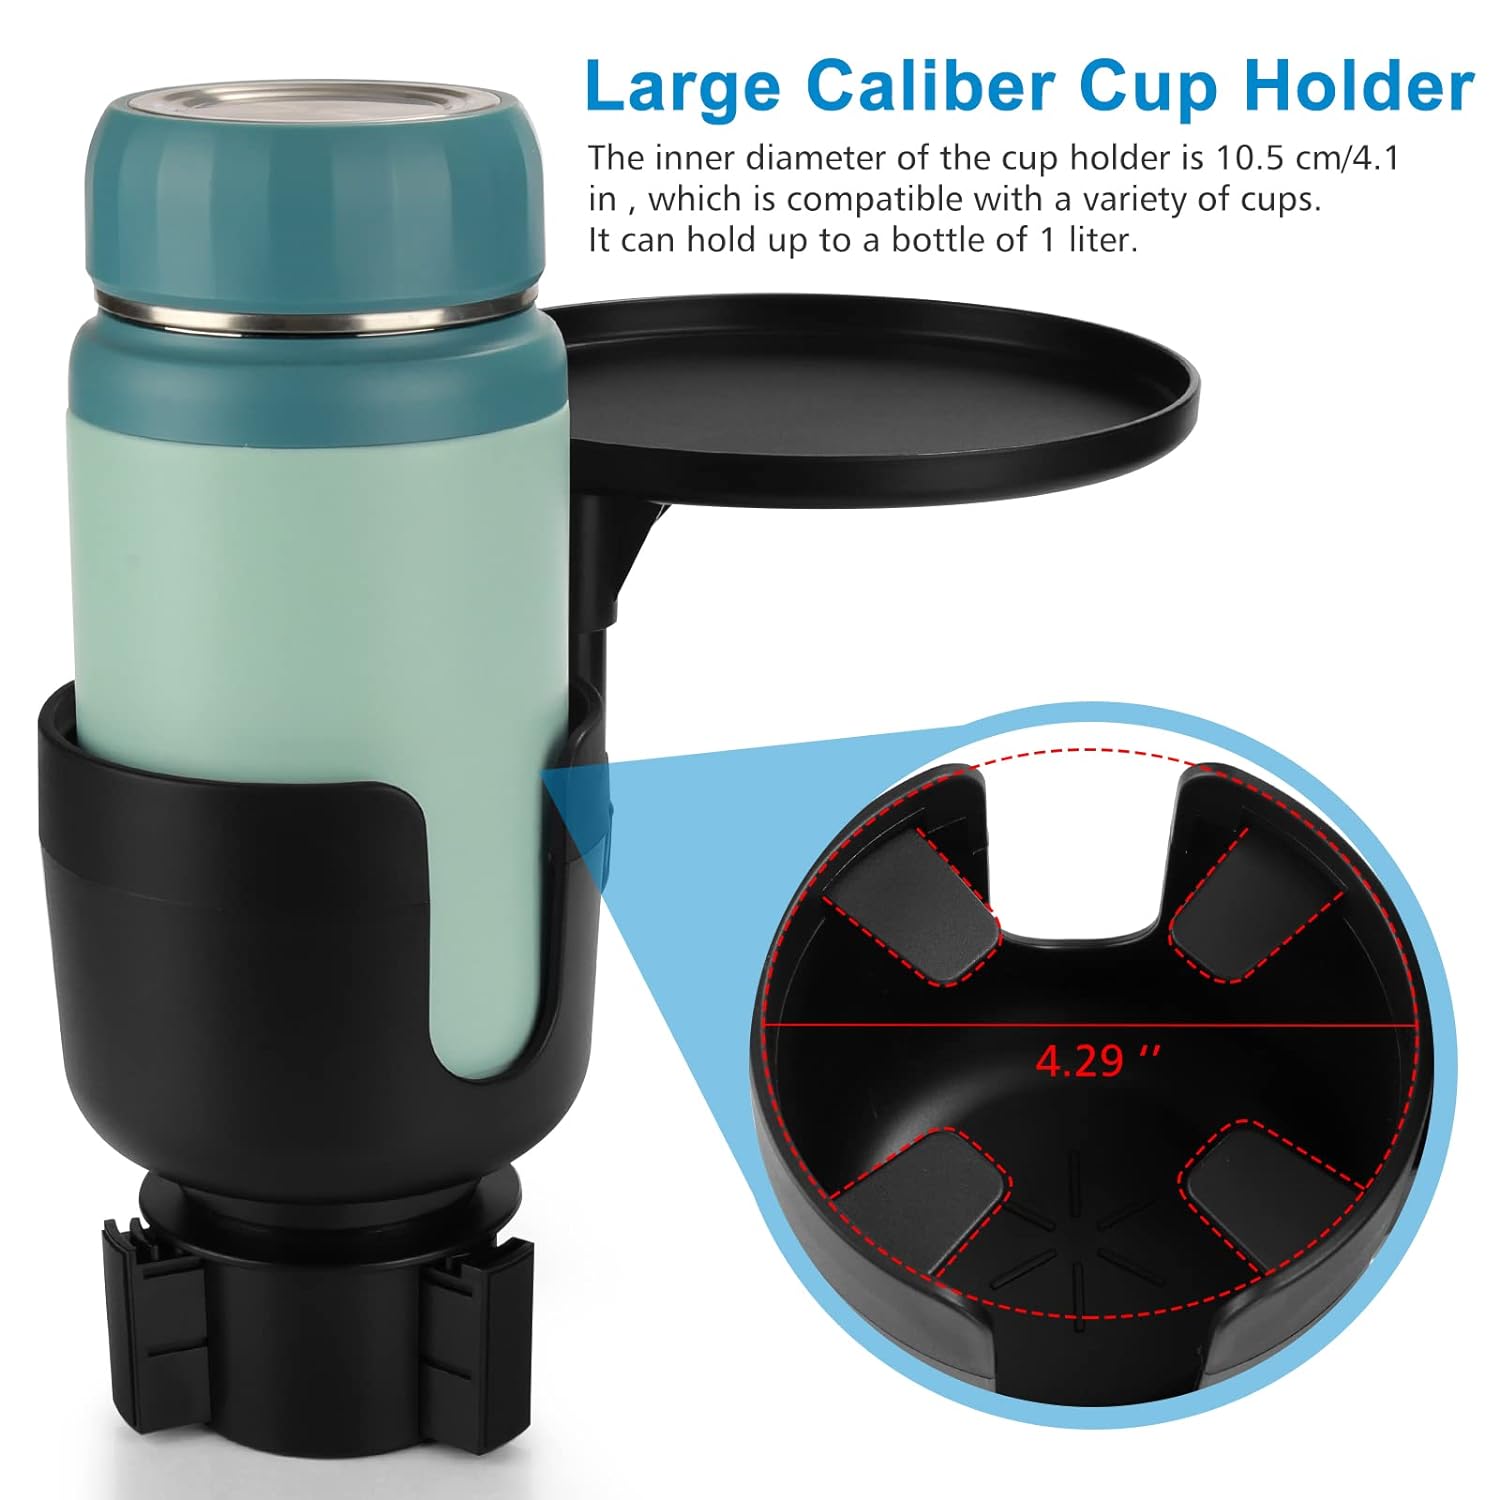 Accmor 2-in-1 Car Cup Holder Expander Adapter with Adjustable Base, Car Cup Holder Expander Organizer with Phone Holder, Fits Hydro Flask, Yeti, Nalgene, Large 32/40 oz Drinks Bottles